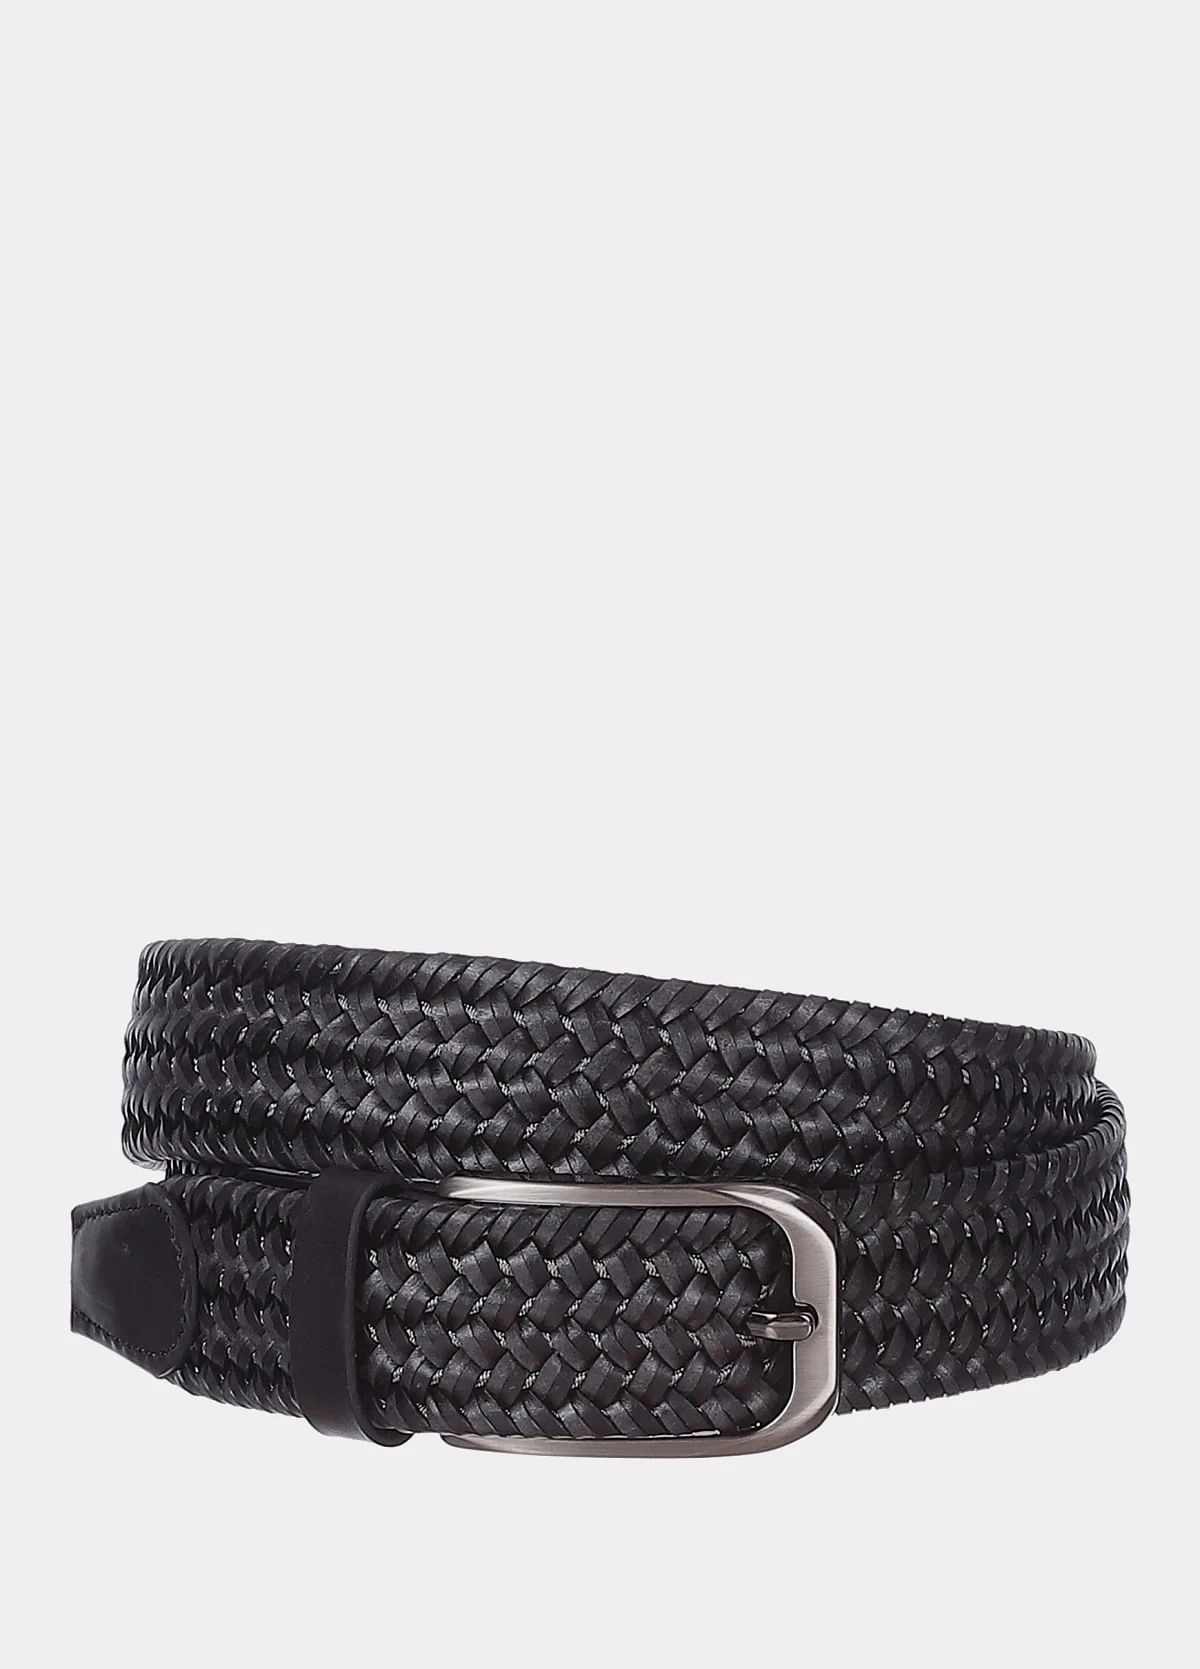 The Classic Leather Belt